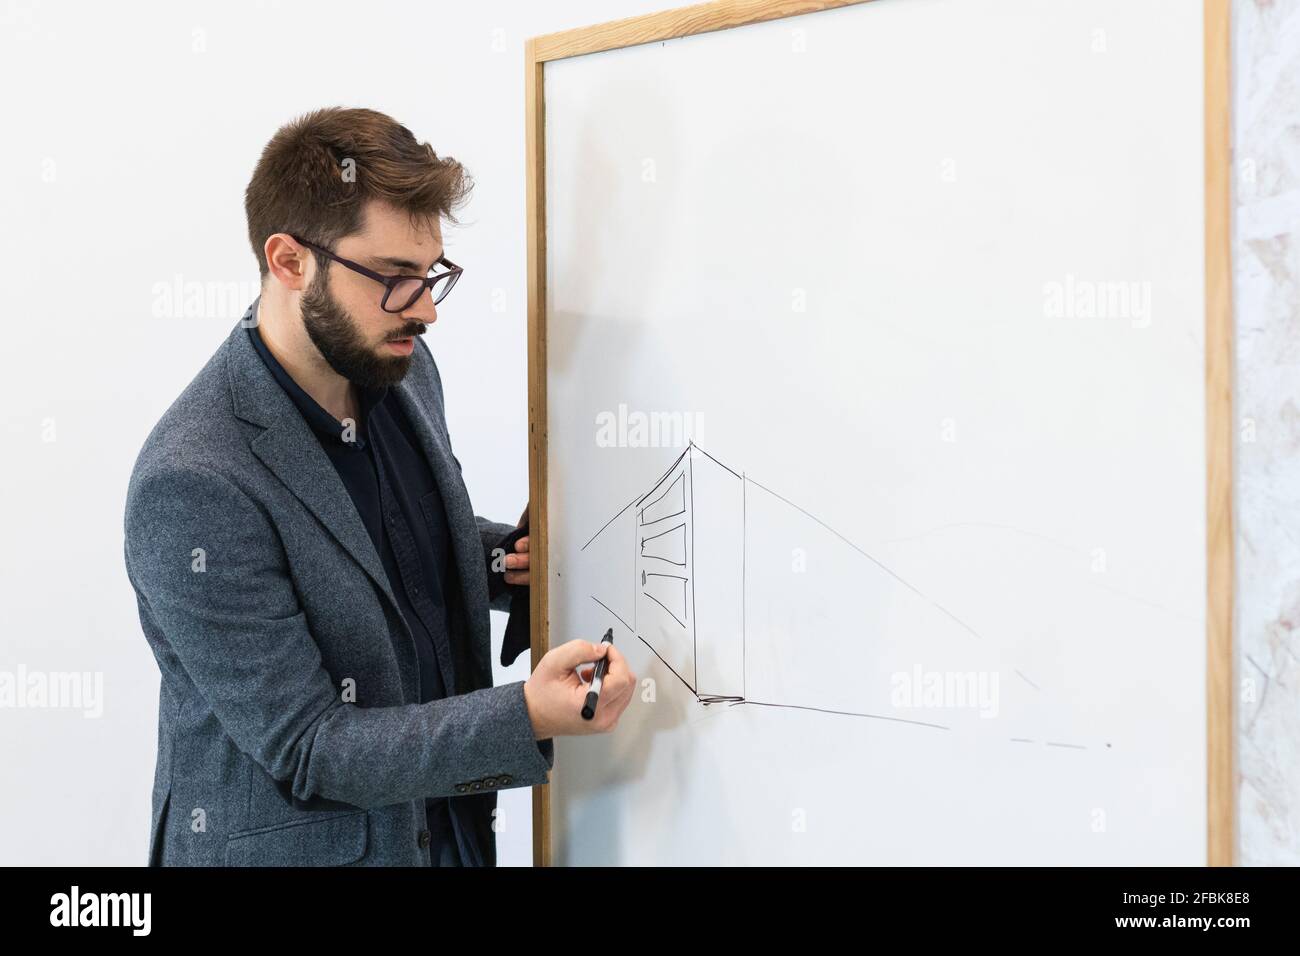 Young businessman drawing diagram on whiteboard Stock Photo